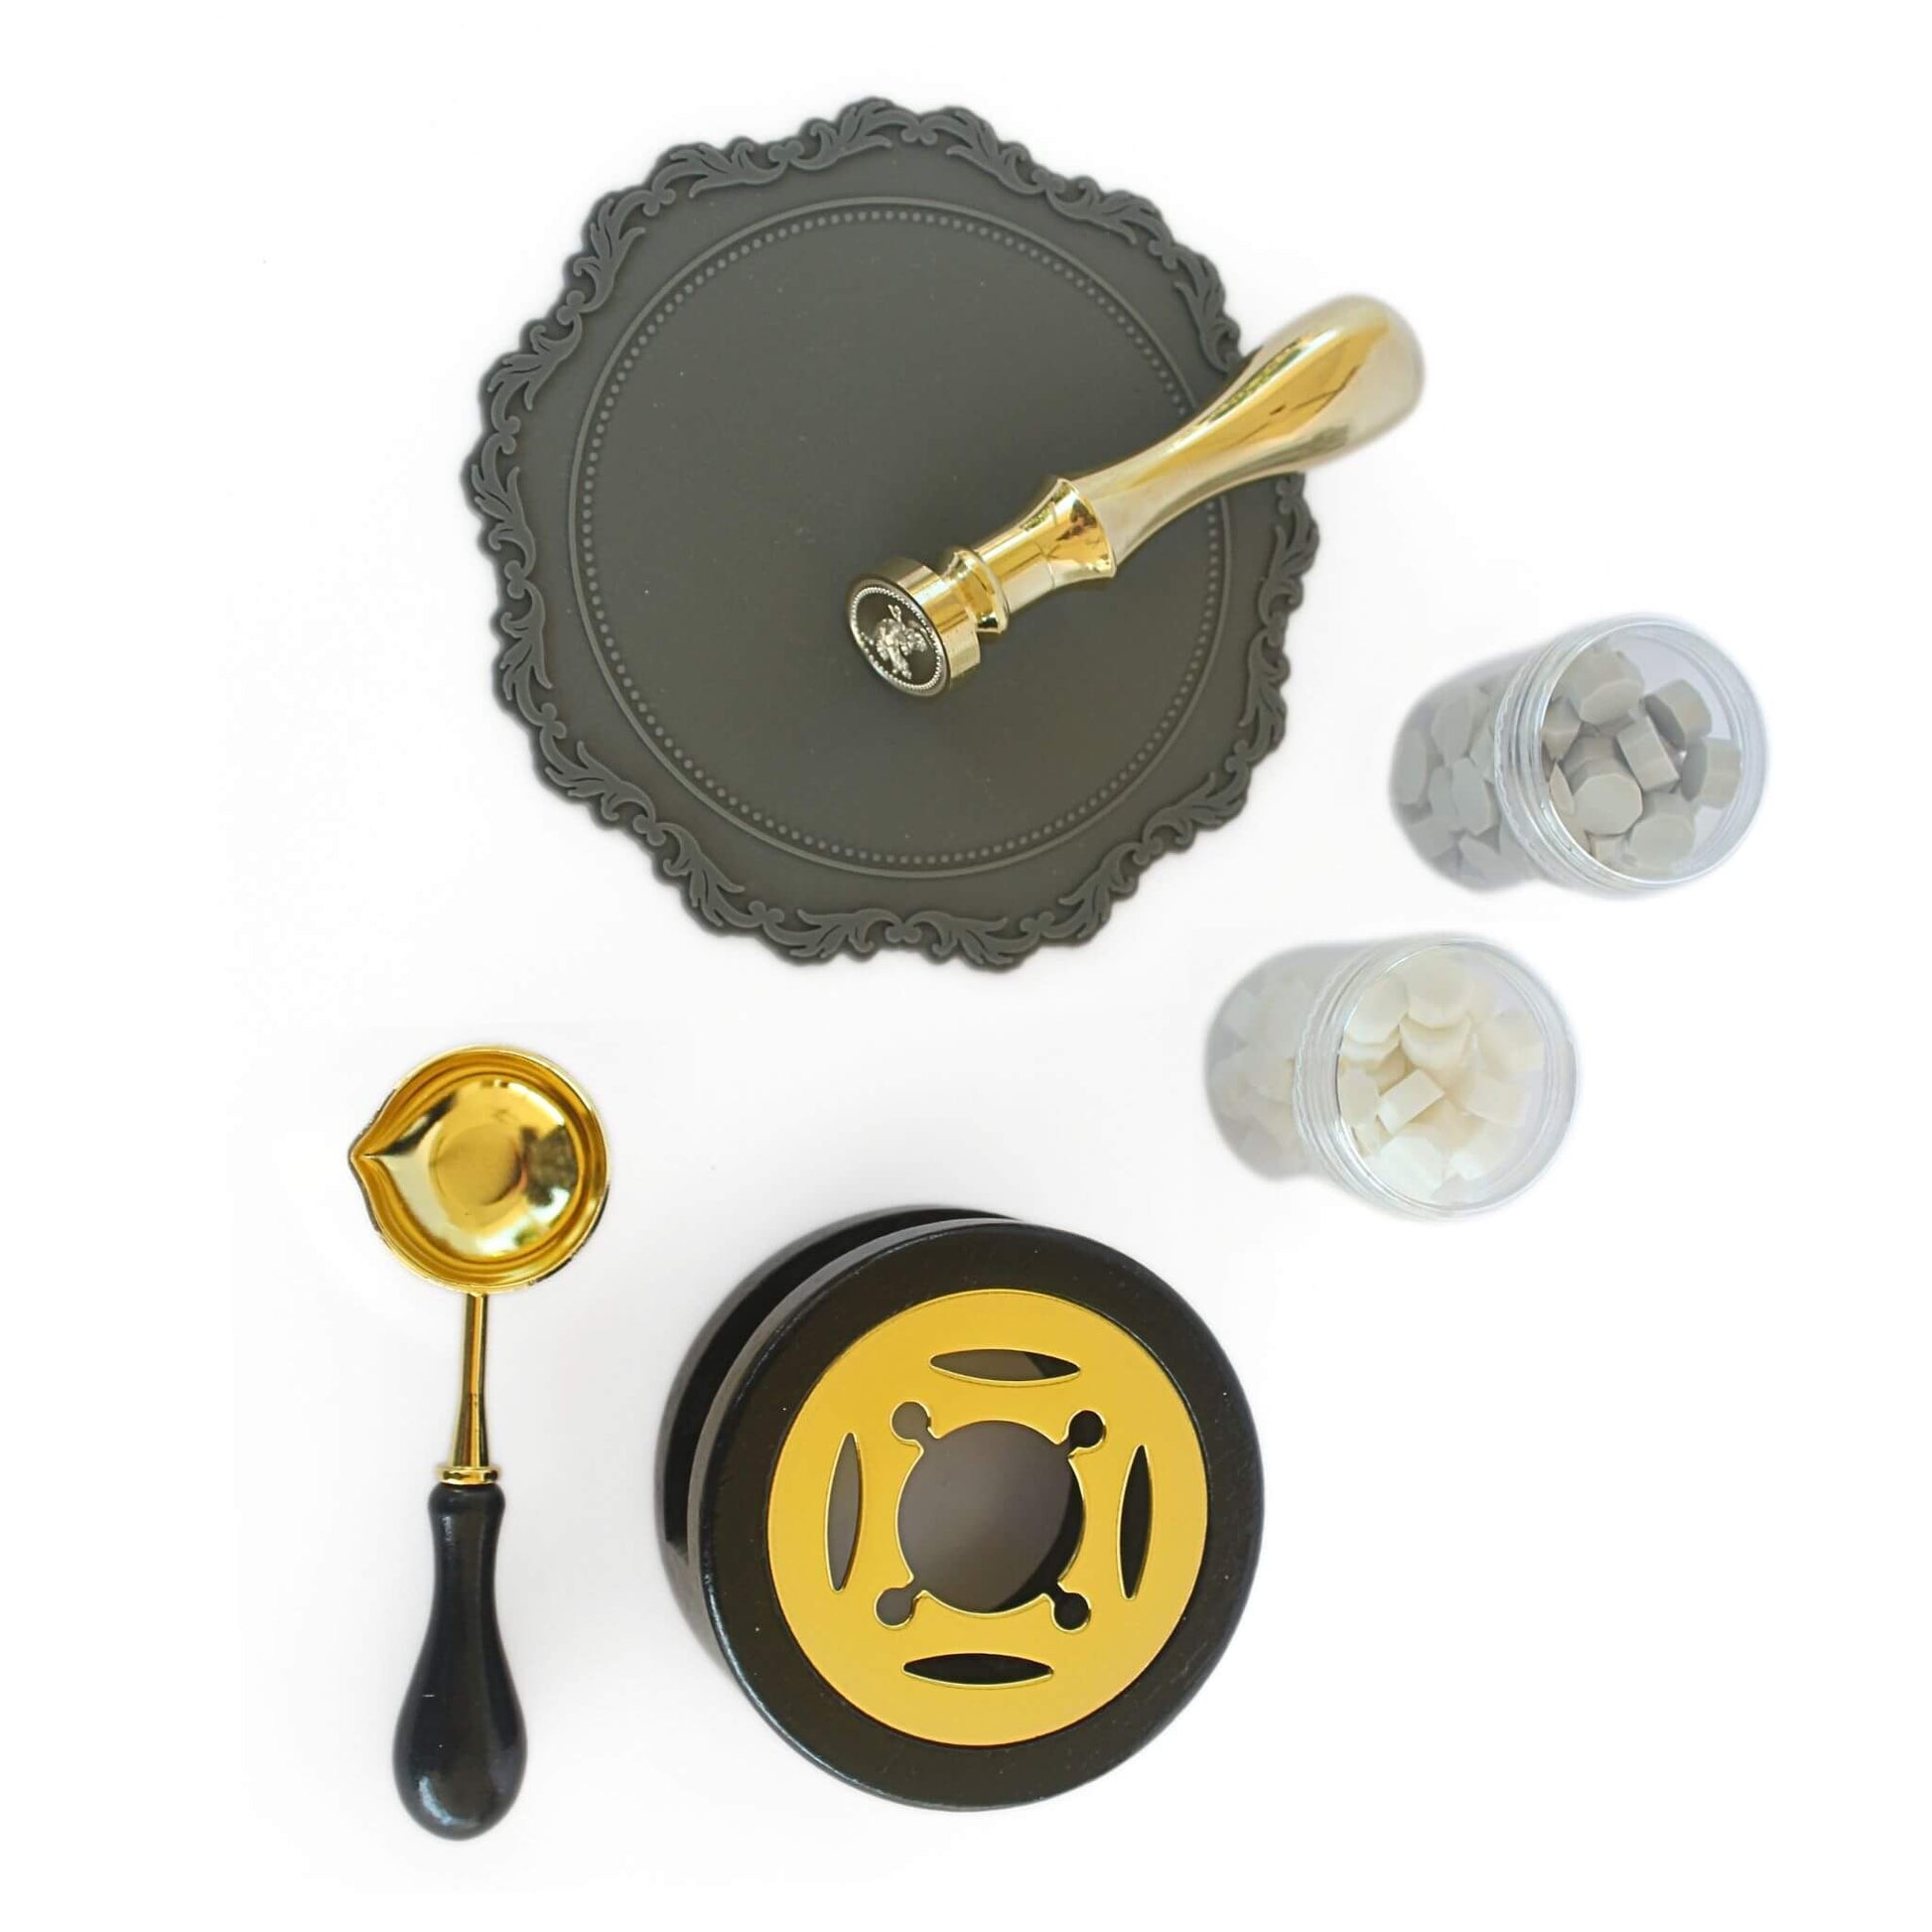 Goddess wax sealing kit with gold brass wax seal, black wax melting stove and spoon and sealing wax beads in grey and white